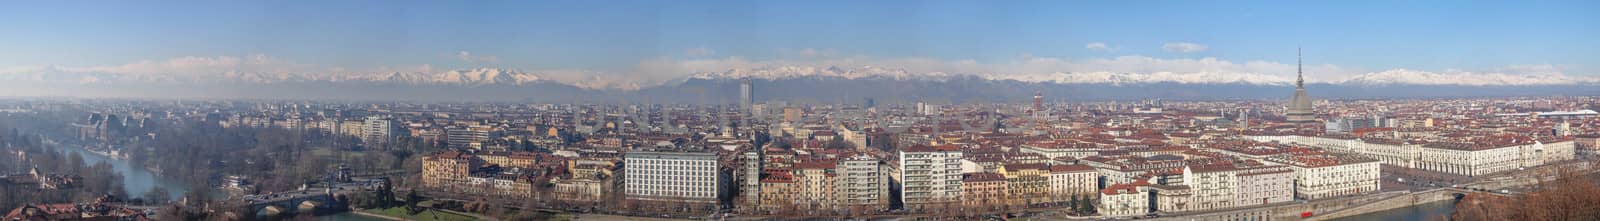 Panoramic view of Turin from the hills surrounding the town